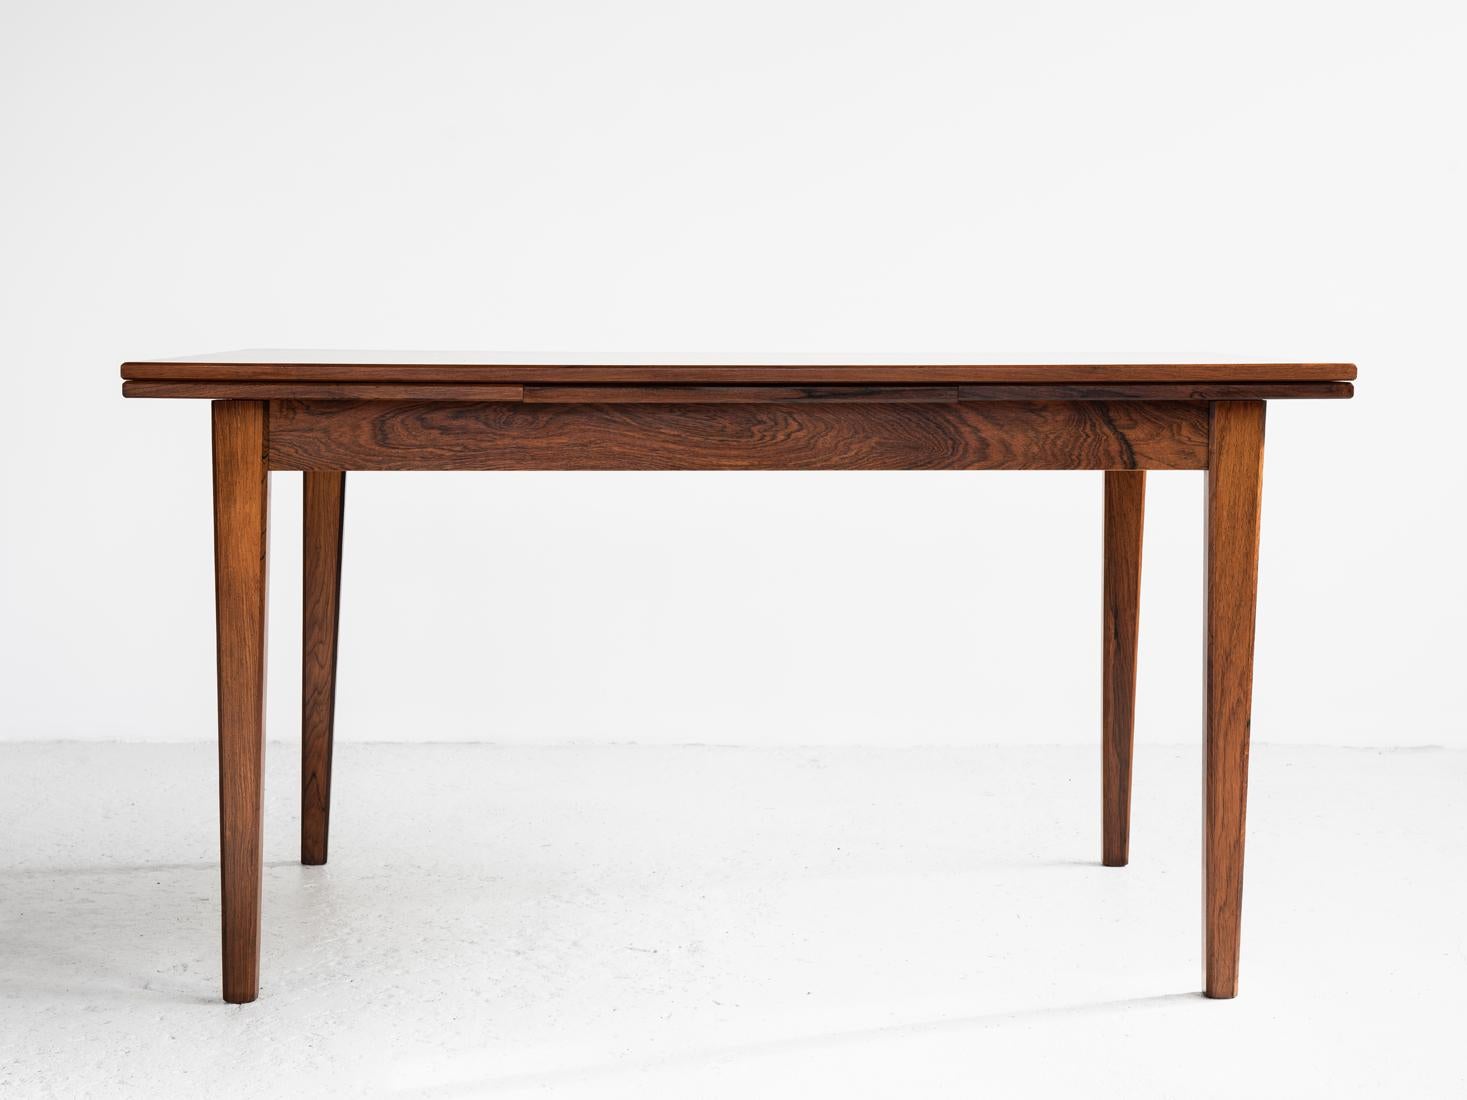 Midcentury table made in Denmark in the 1960s. The dining table is easily extendable on either one or both sides. It has beautiful drawings in the wood. The table is made of rosewood and in very good condition.

Dimensions:
Height 74 cm
Length